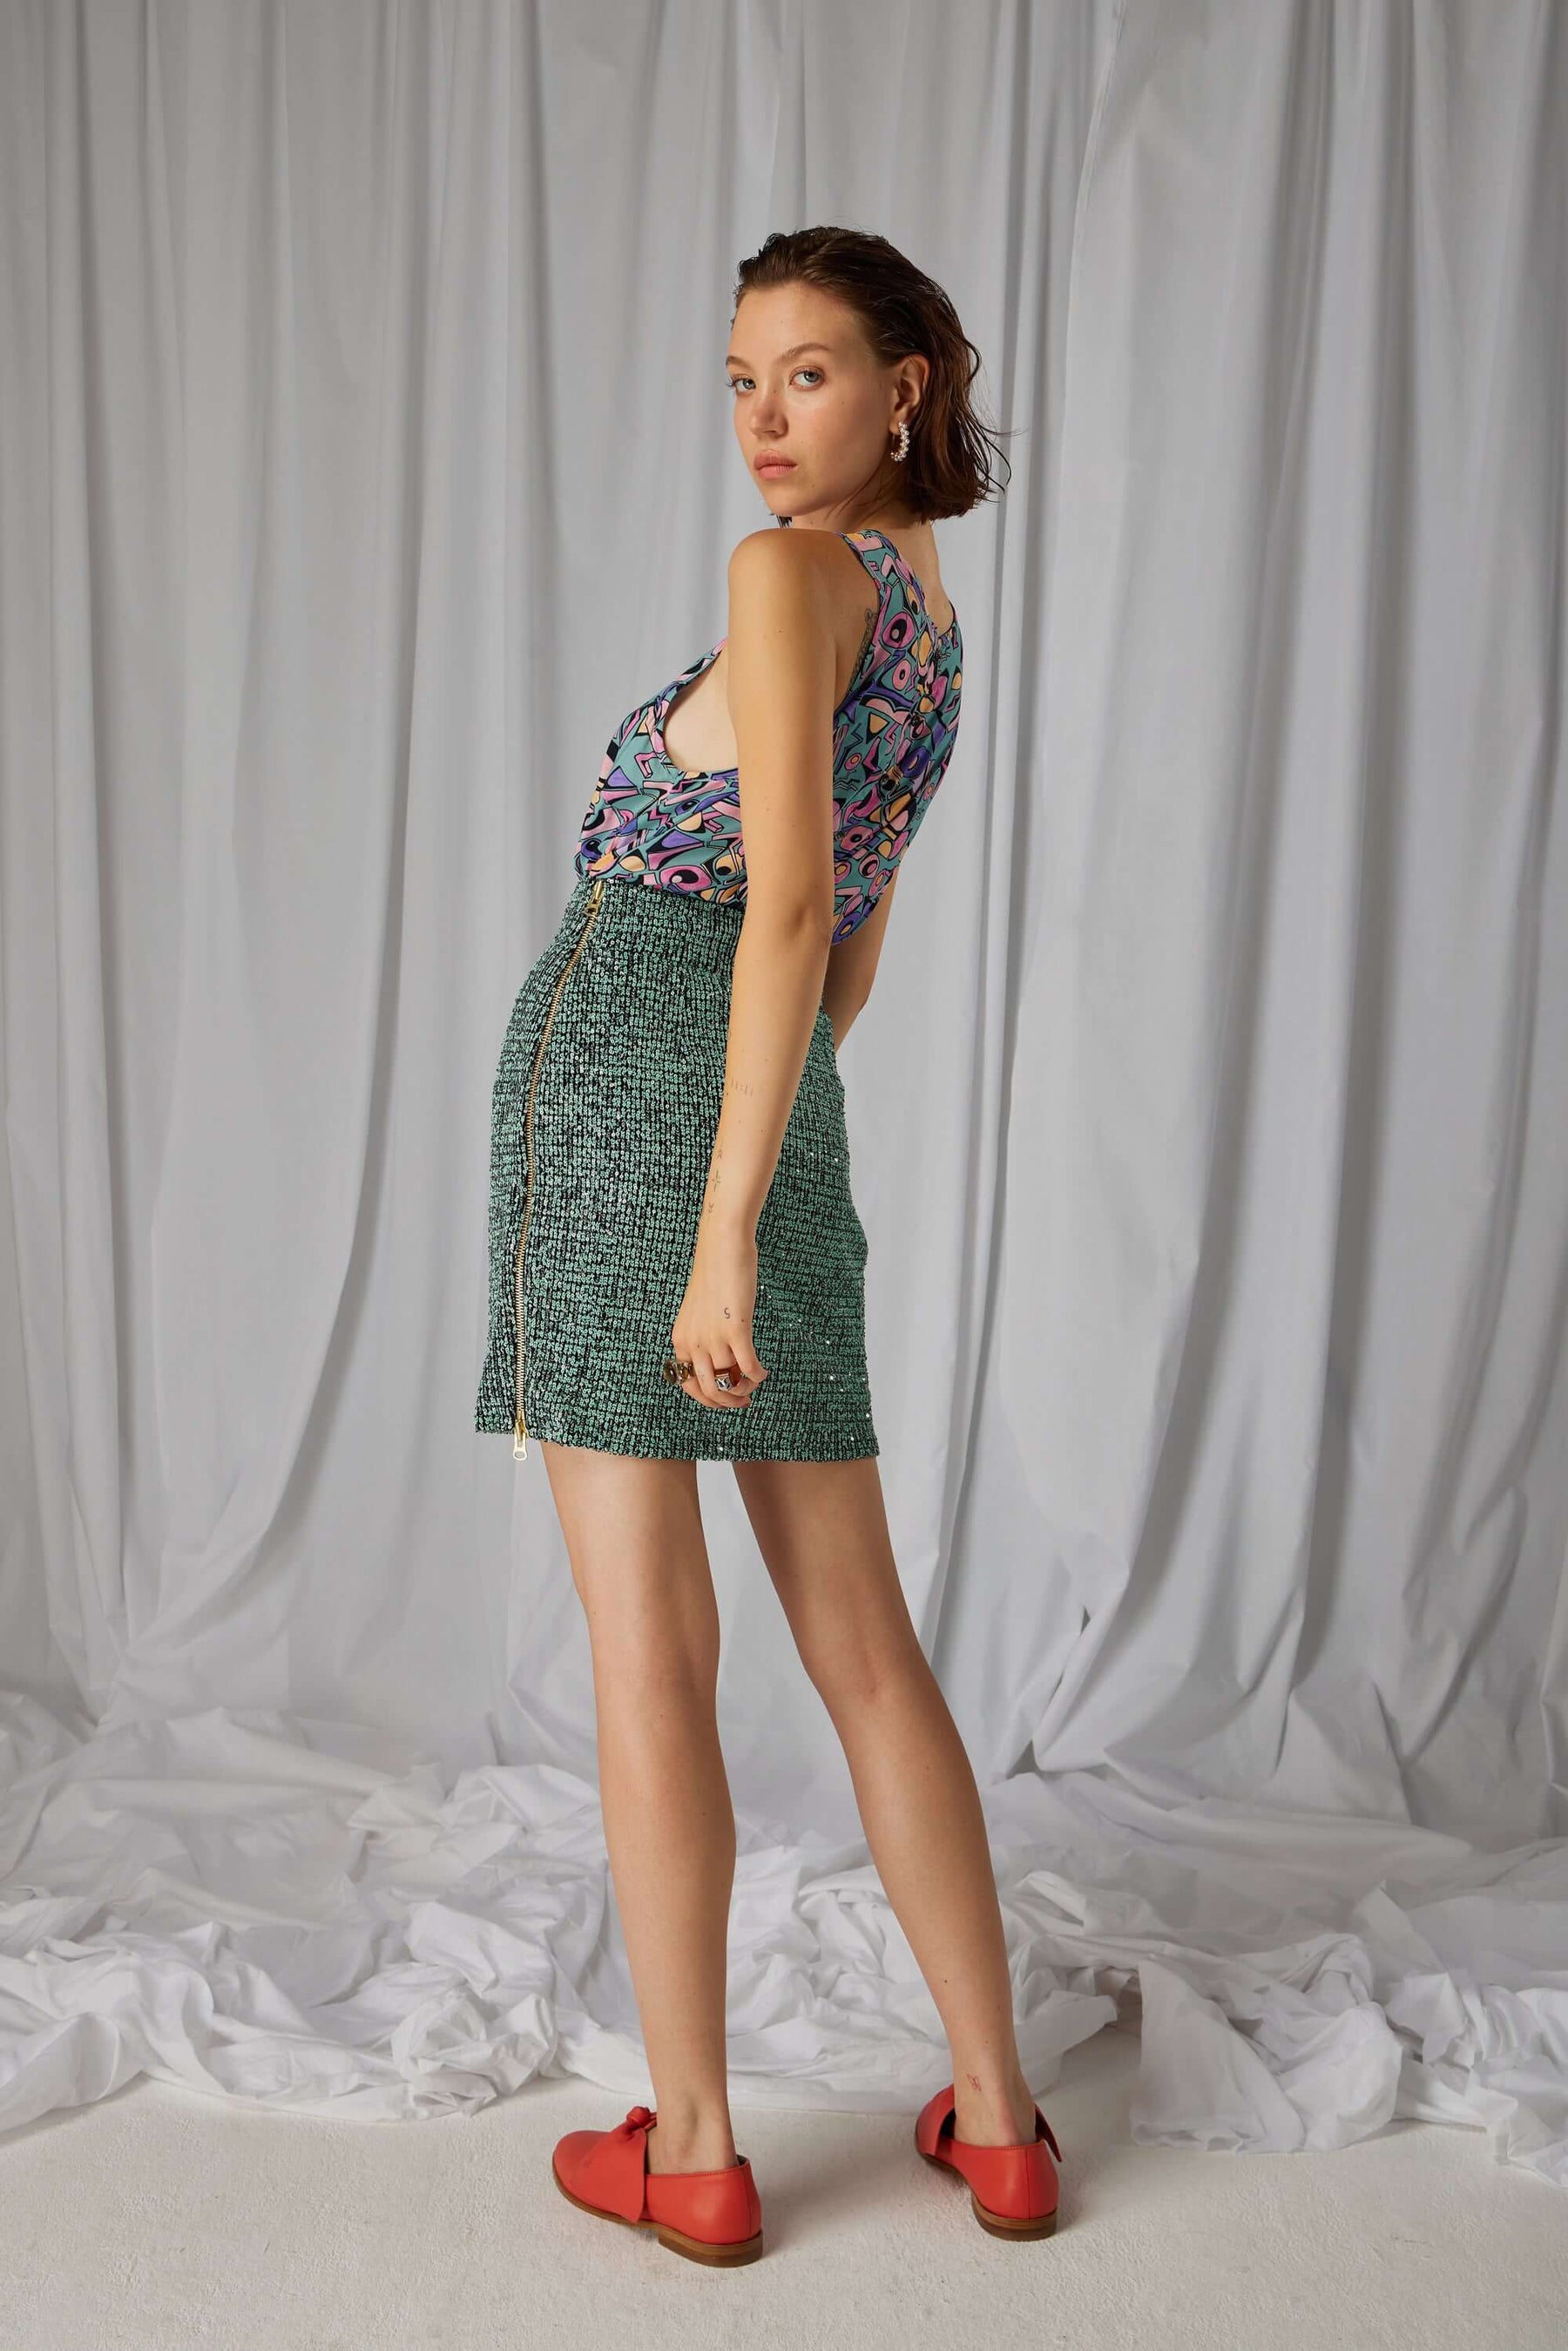 Molly skirt in Liberty sequins